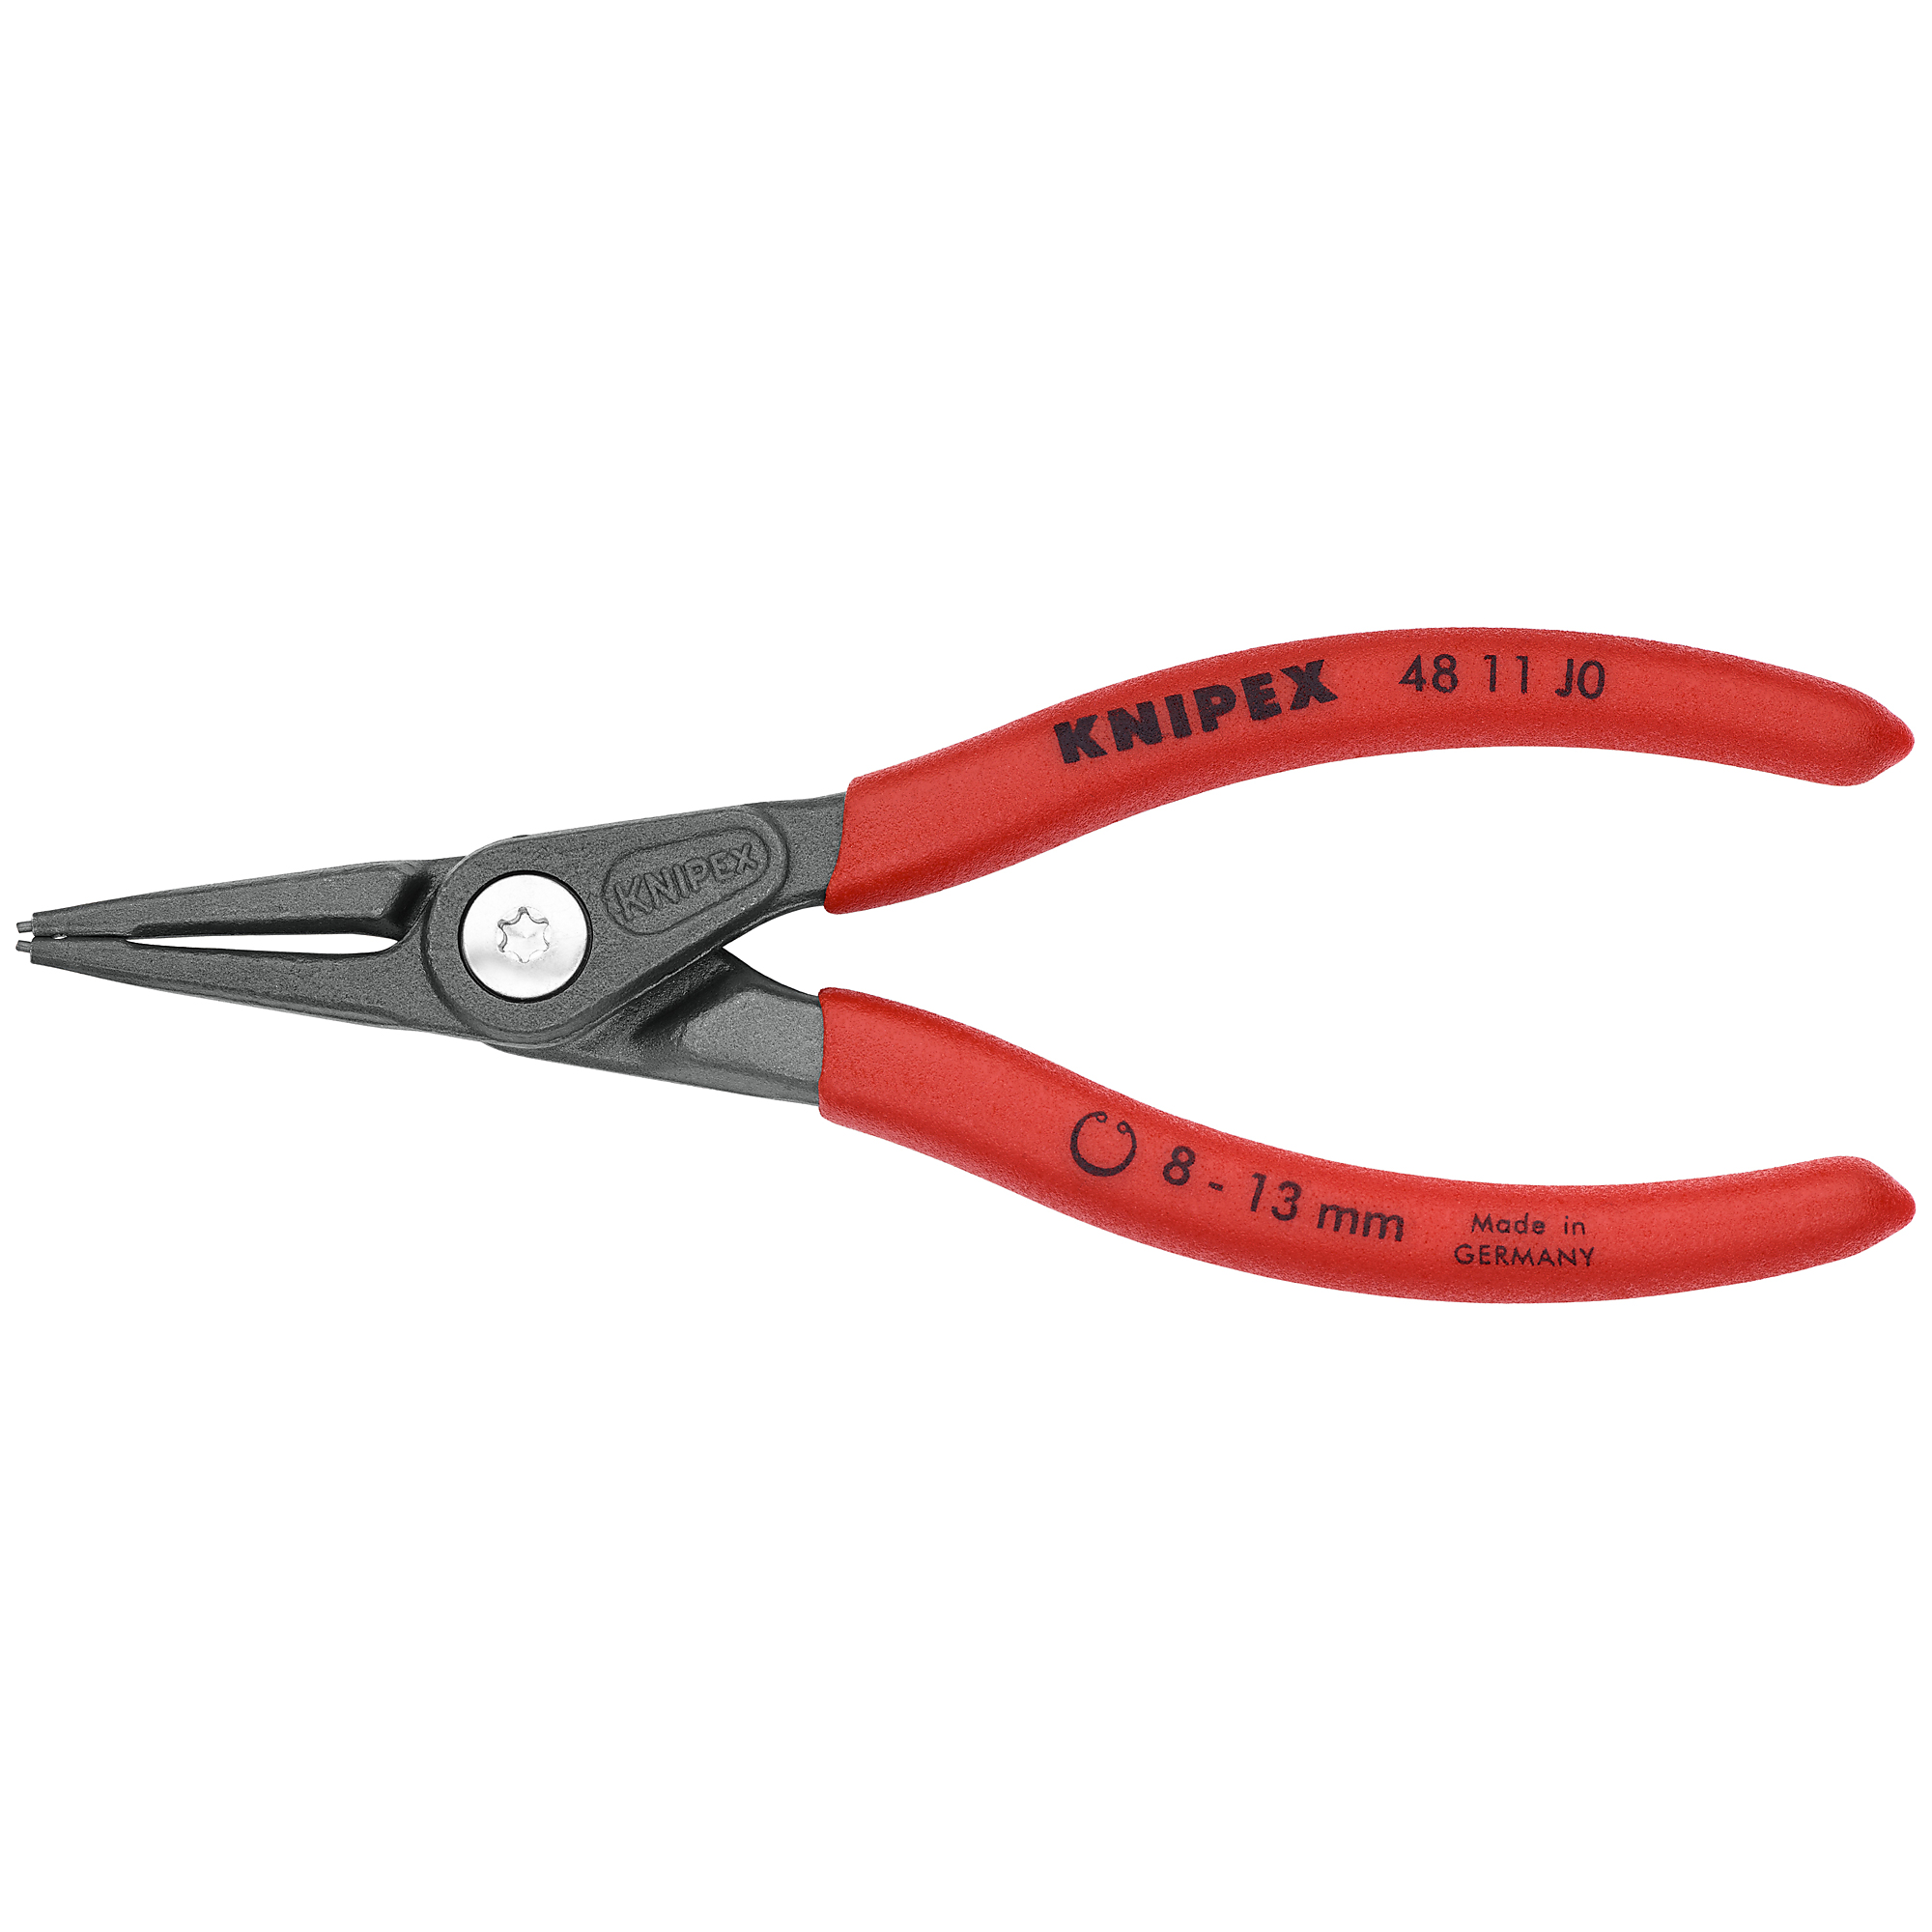 KNIPEX, Int Precision Snap Ring Pliers, 1/32 tip, 5.5Inch, Pieces (qty.) 1 Material Steel, Model 48 11 J0